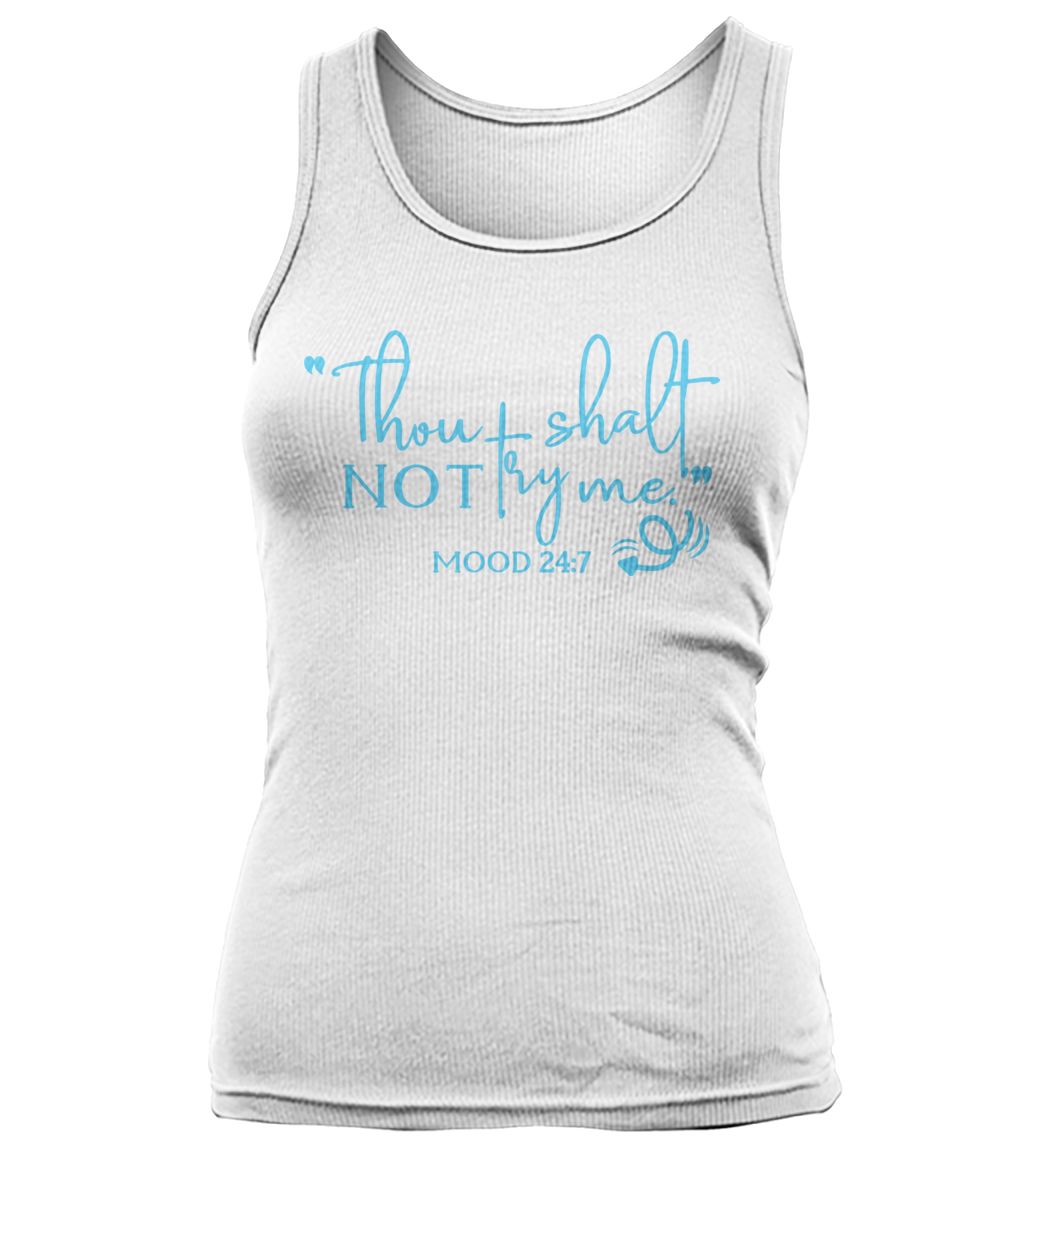 Thou shall not try me mood 24-7 mother's day women's tank top